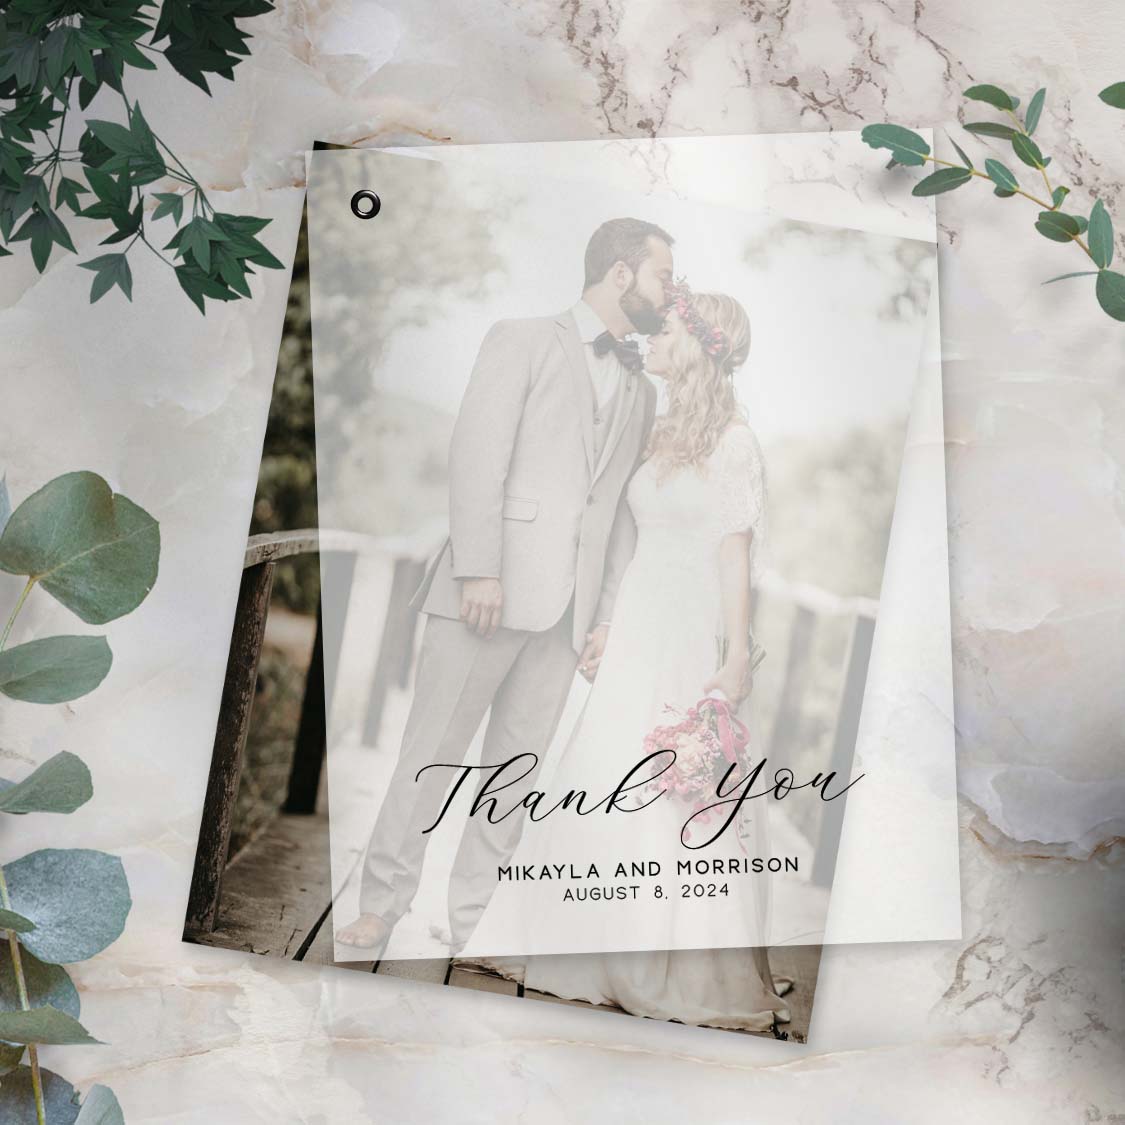 writing your wedding thank you cards with these vellum overlay cards